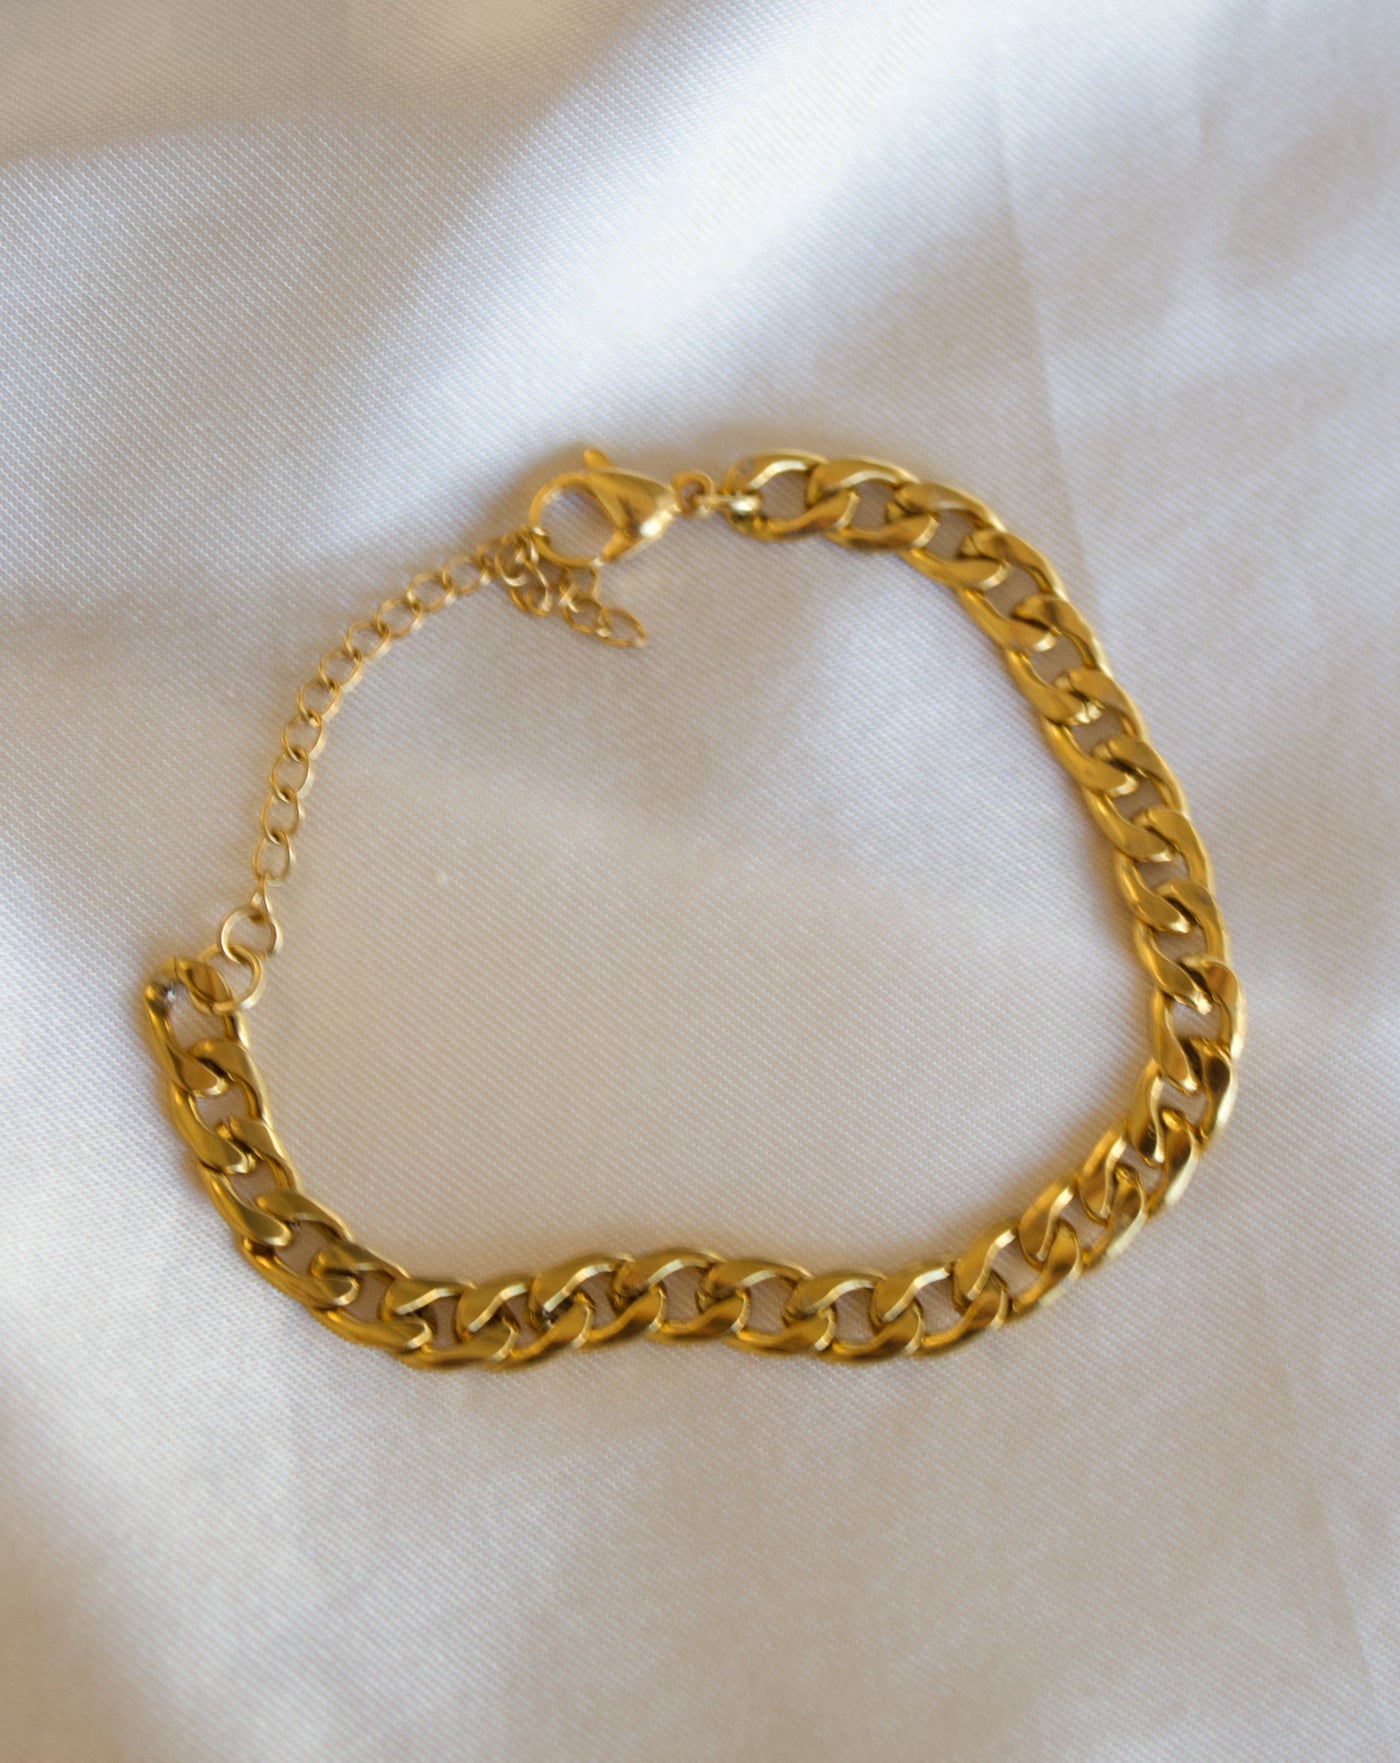 Gold and silver Cuban chain bracelet